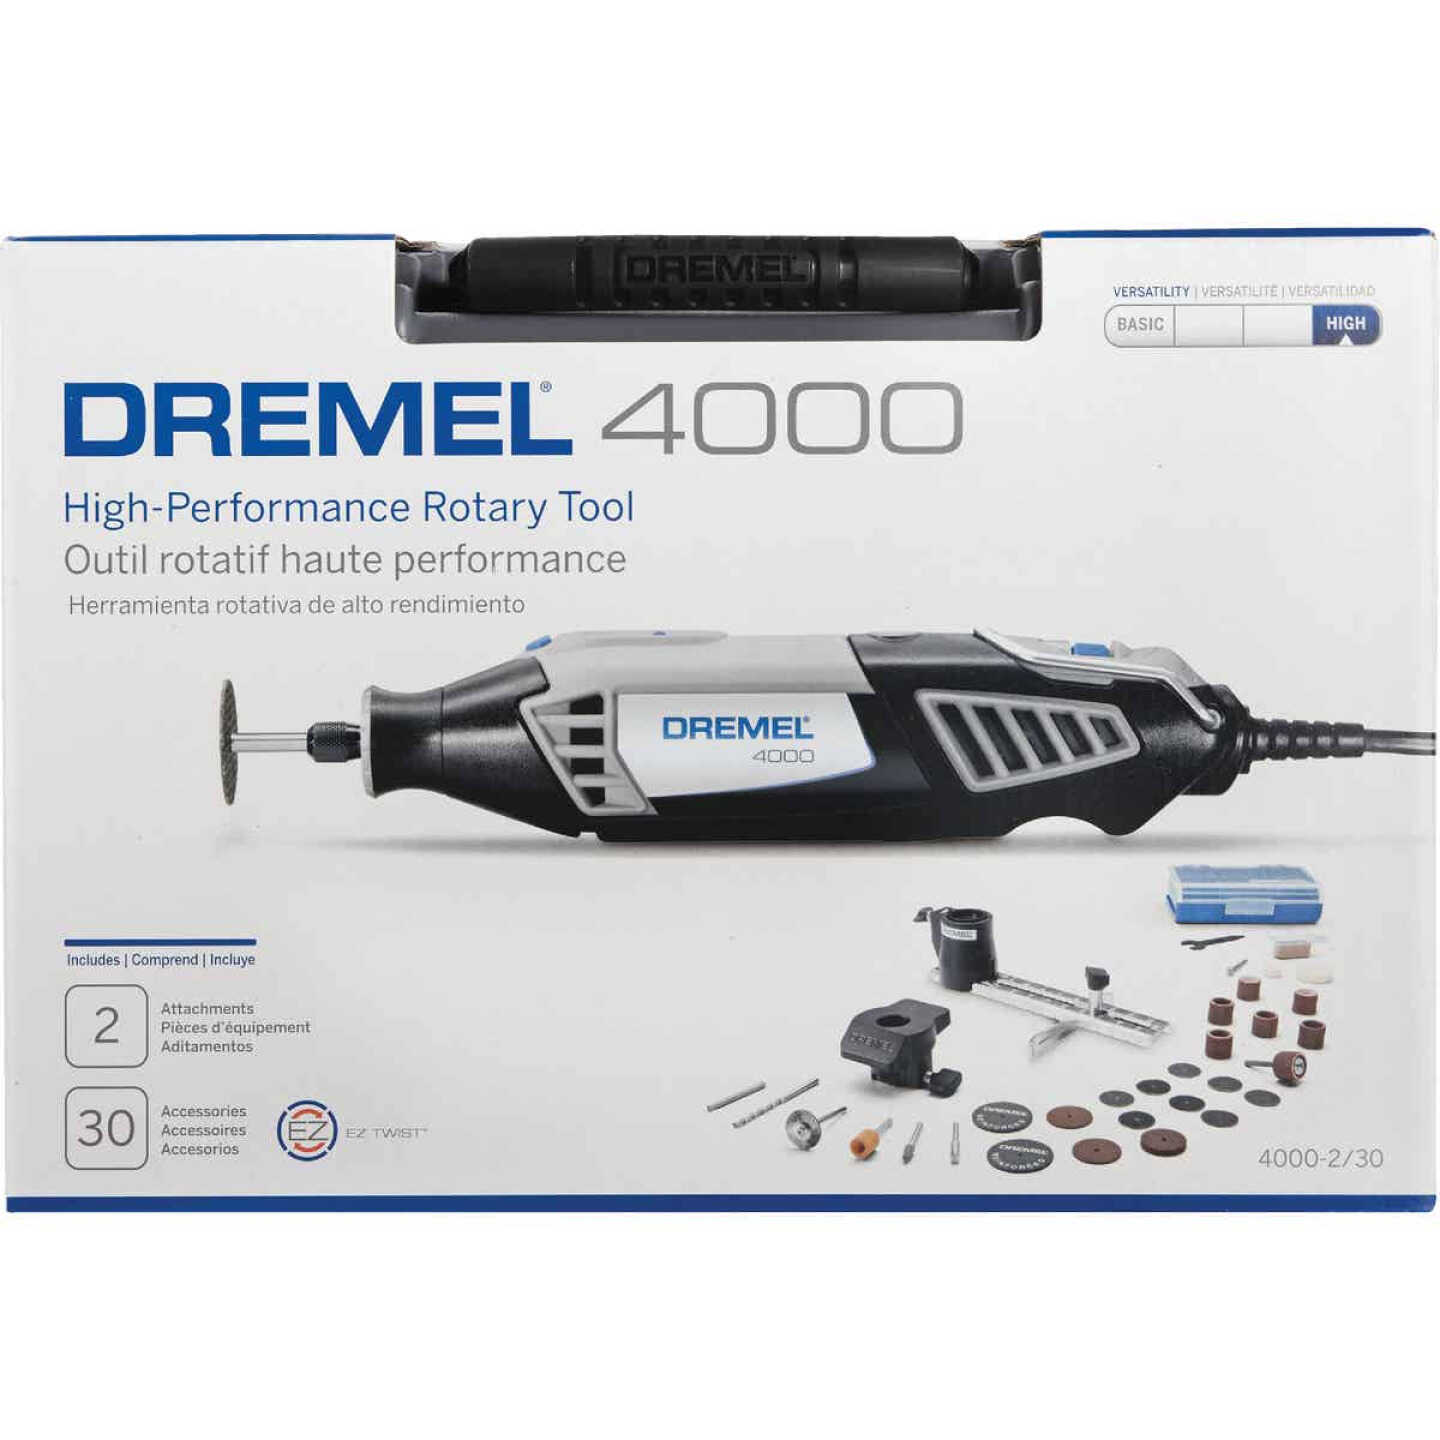 Dremel Workstation - Review, How to Use, and a Few Tips 